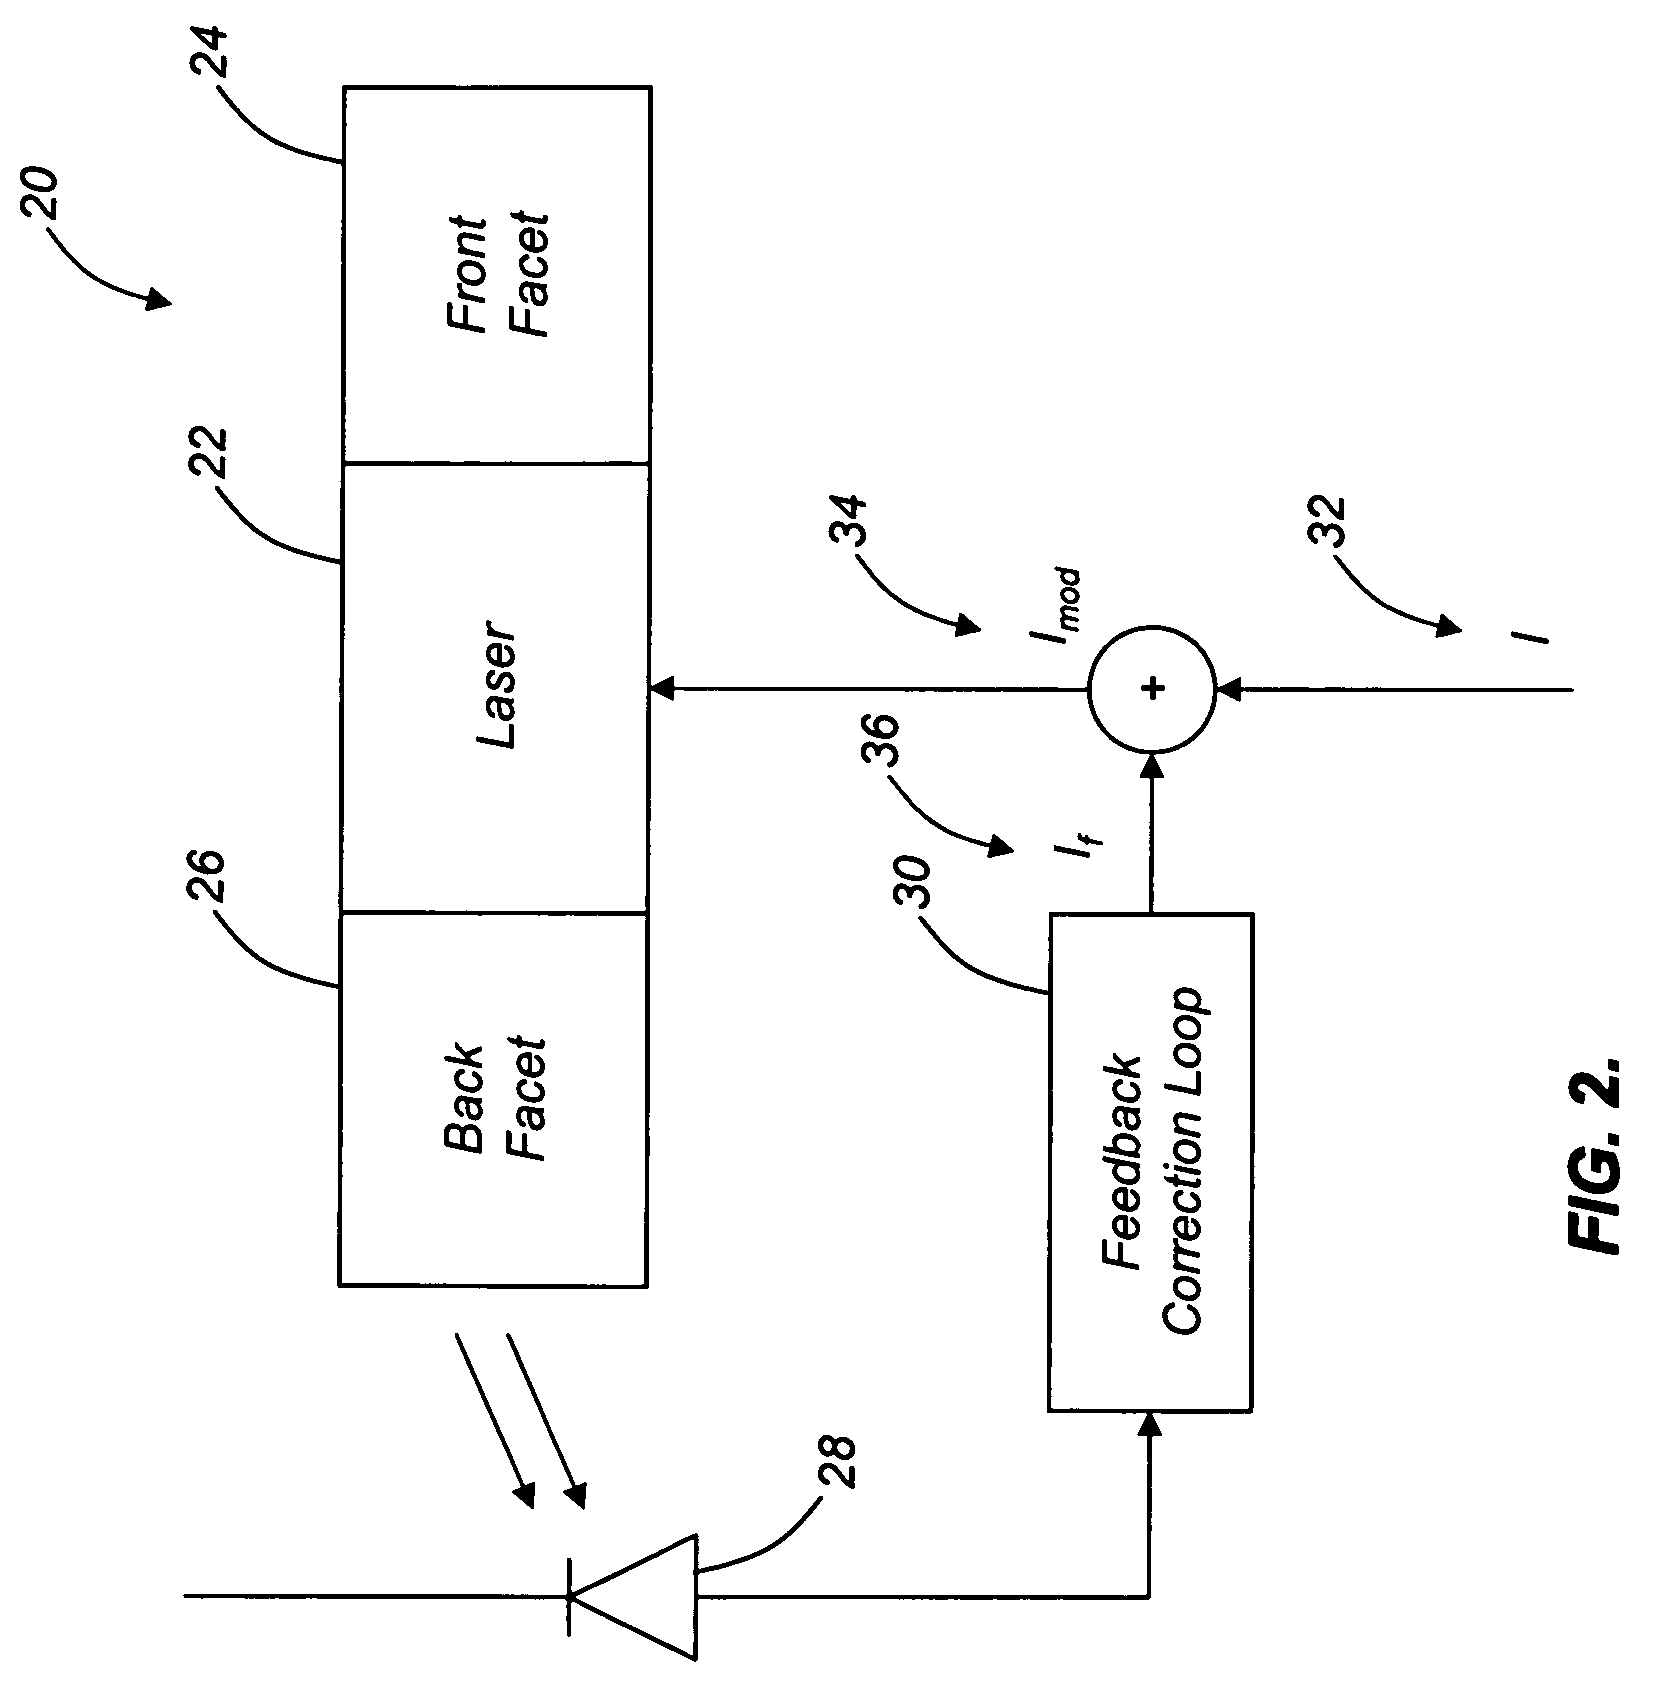 Systems and methods for real-time compensation for non-linearity in optical sources for analog signal transmission